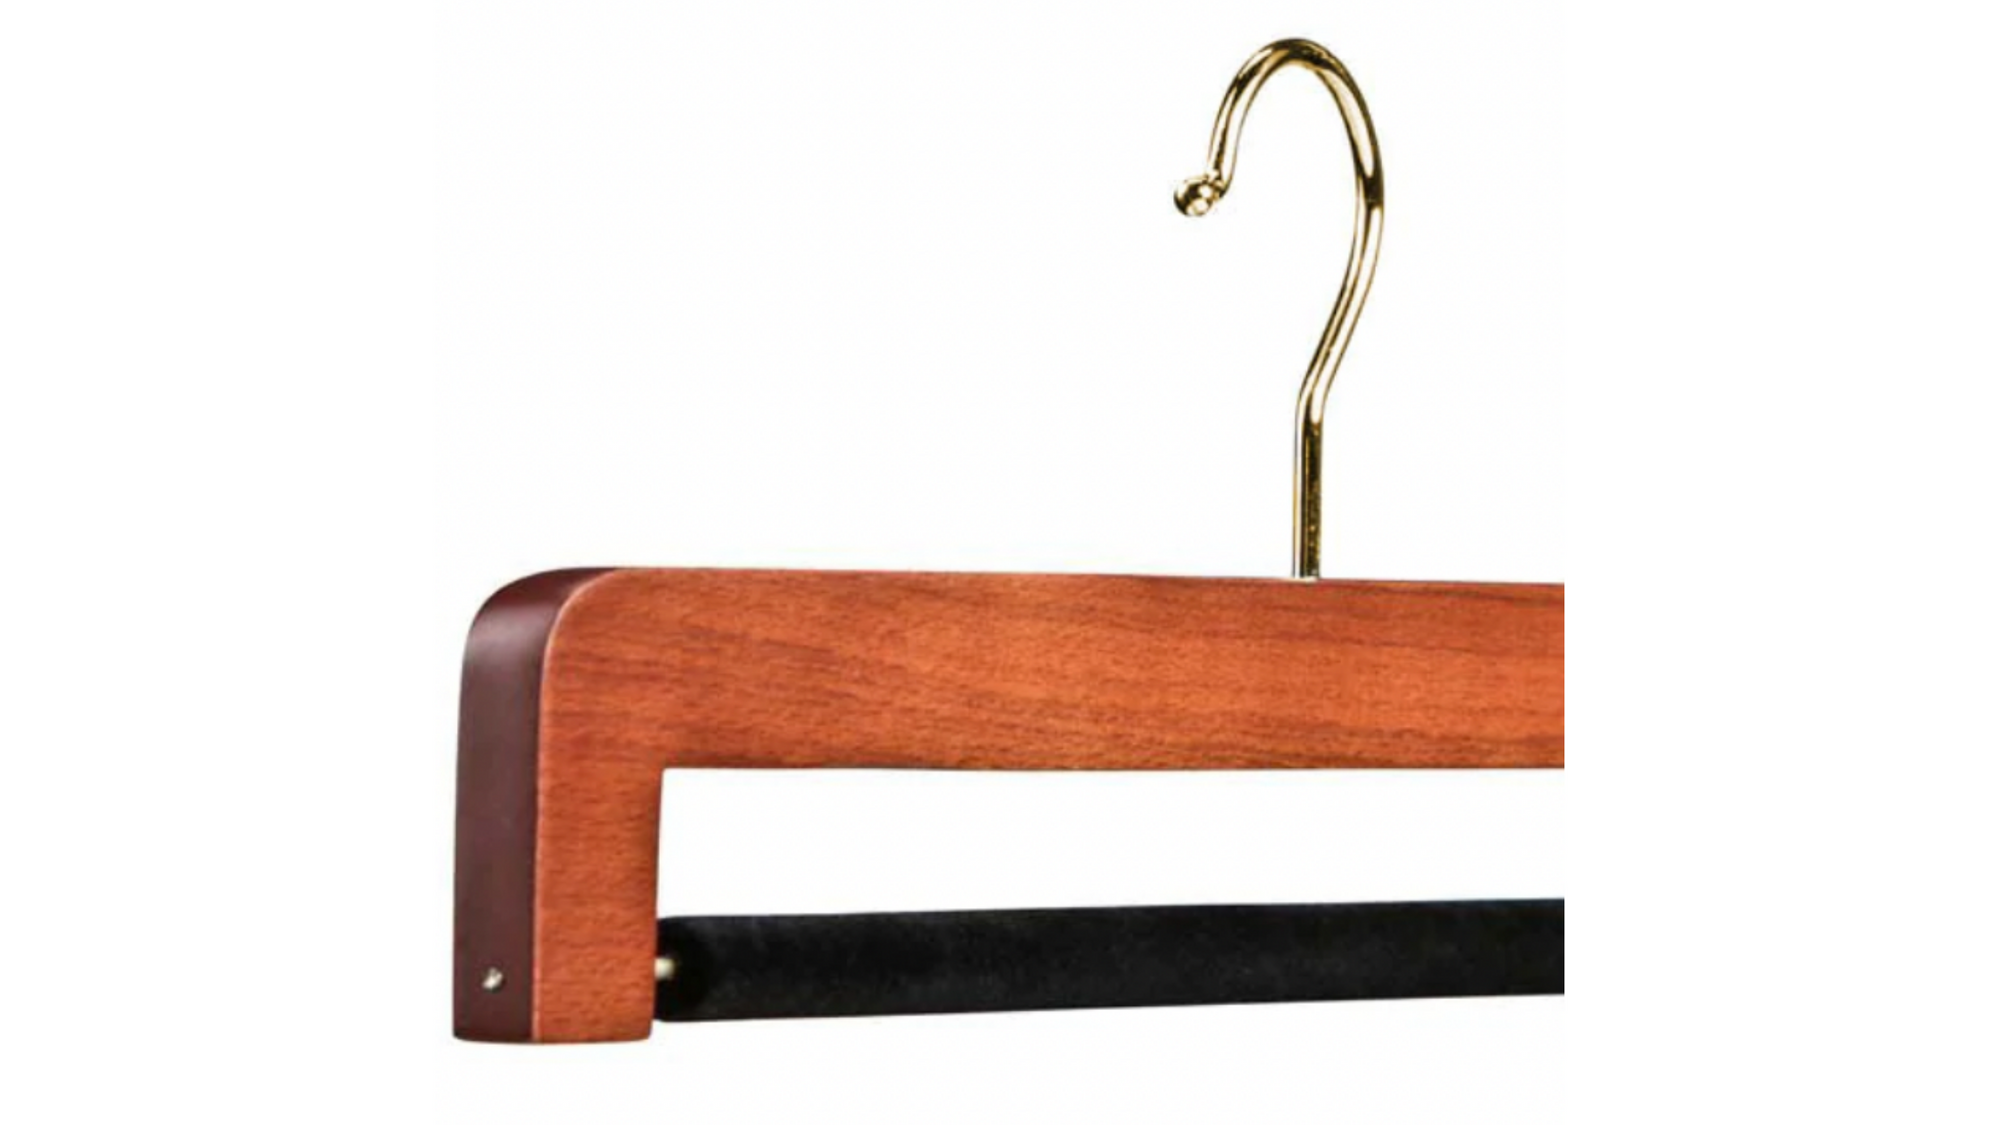 Wooden Clamp Hanger with Felt Lining and Rugged Metal Snap Lock  On Sale   Bed Bath  Beyond  29344262